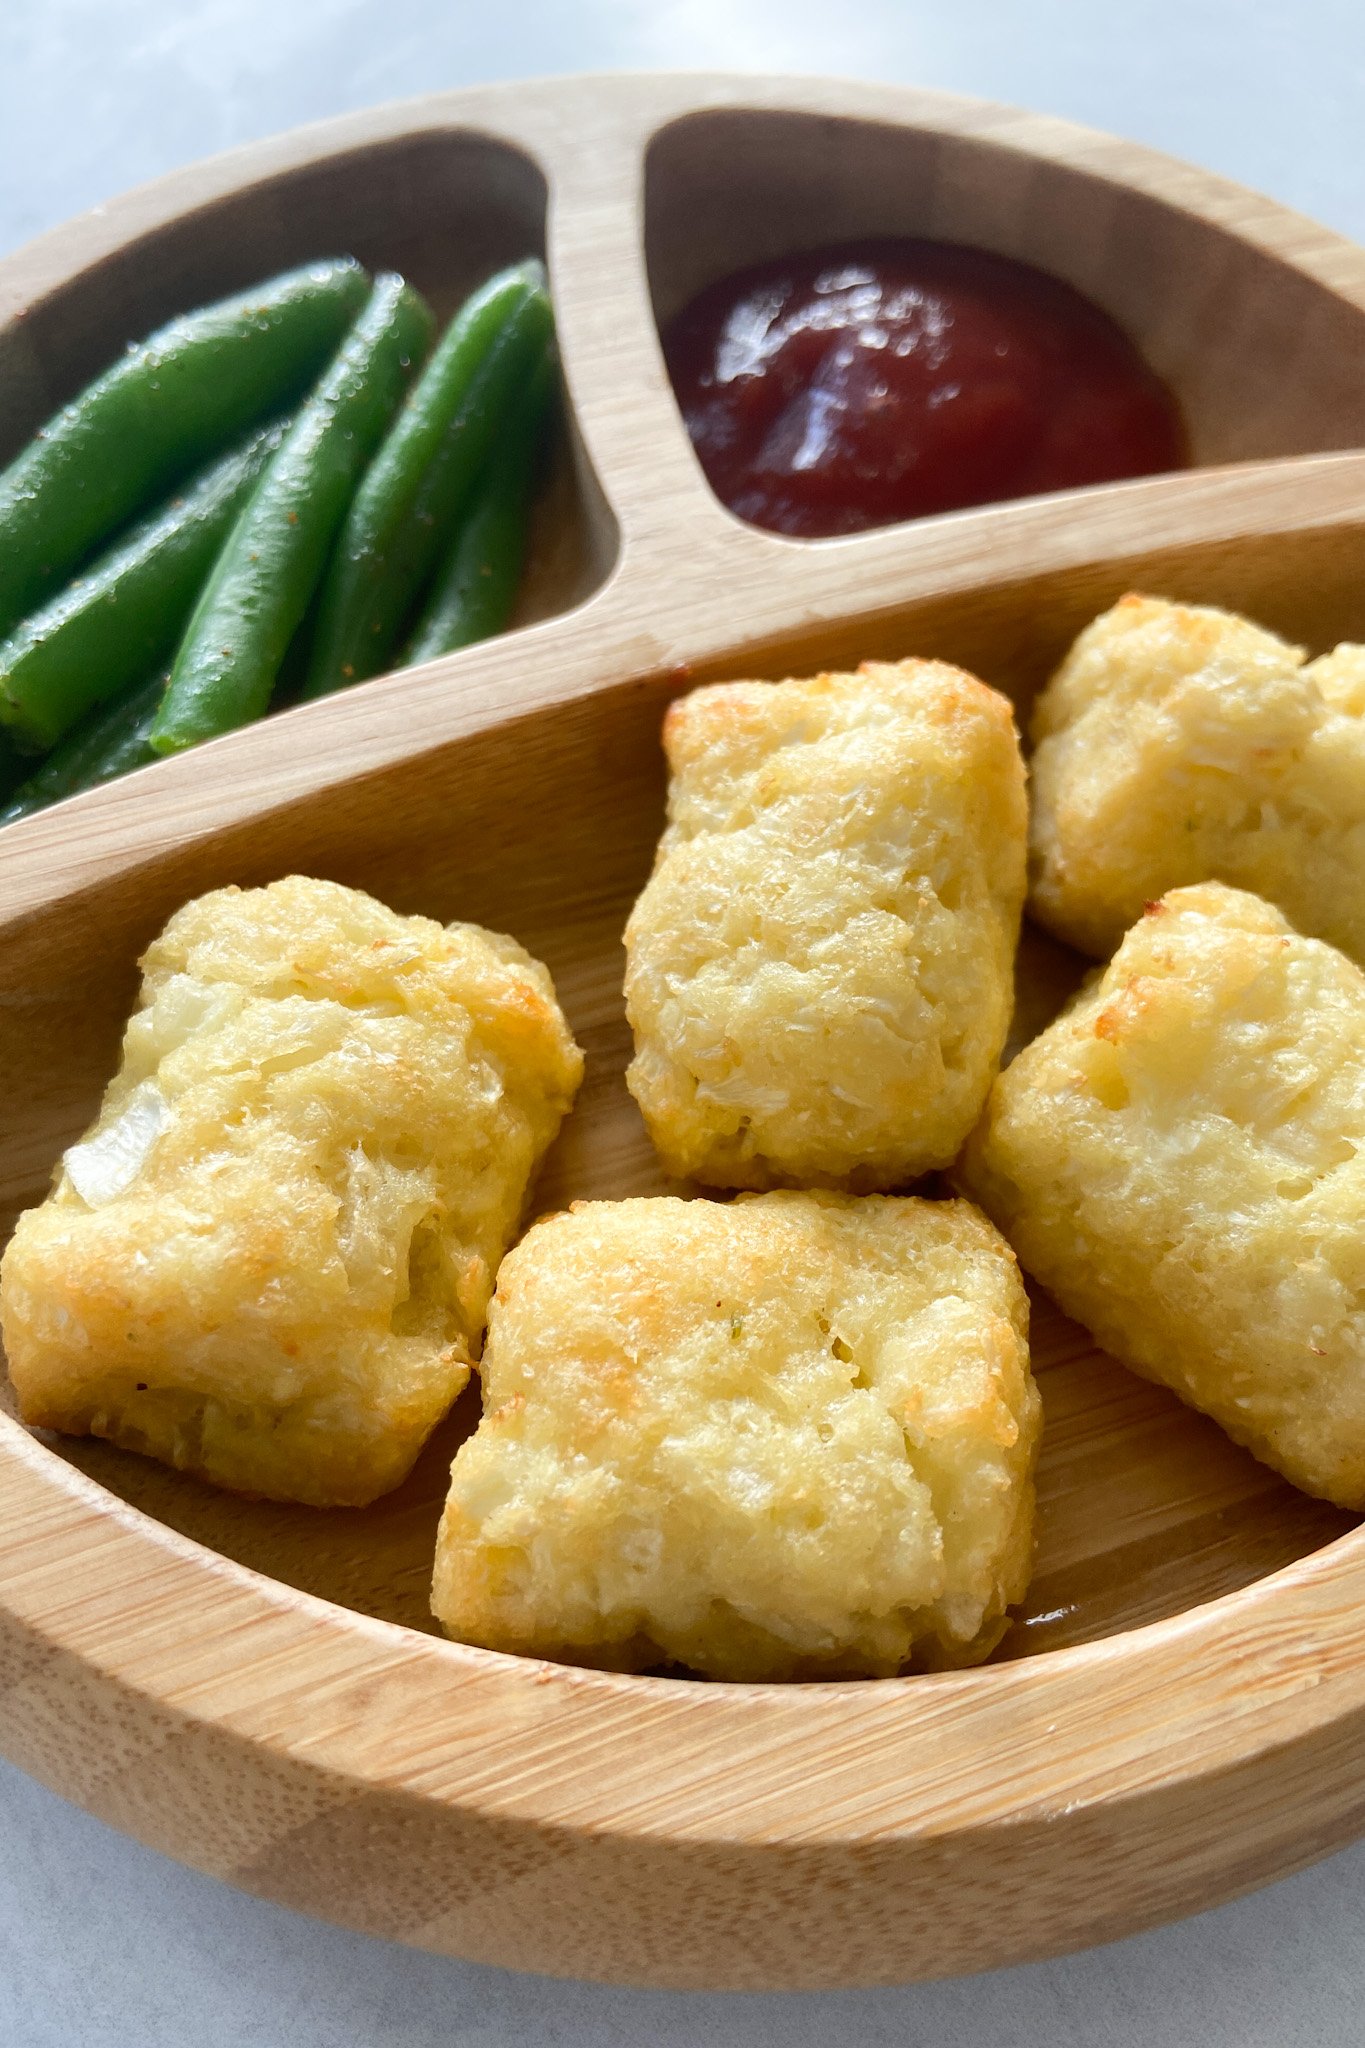 Cauliflower tots served with ketchup and green beans